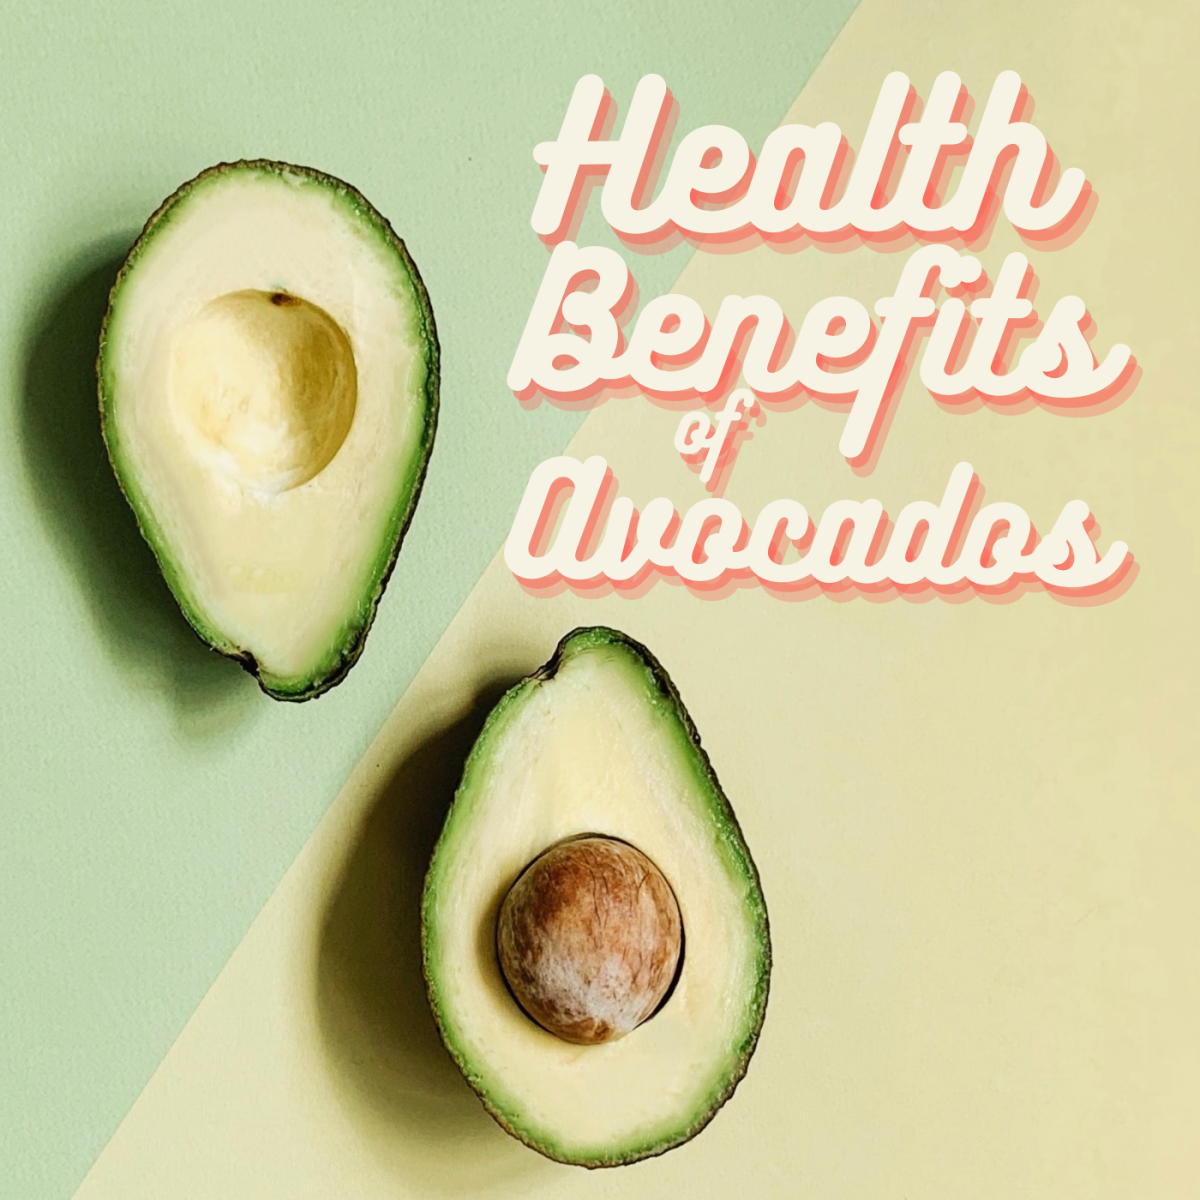 10 Health Benefits of Avocados: The Super Food